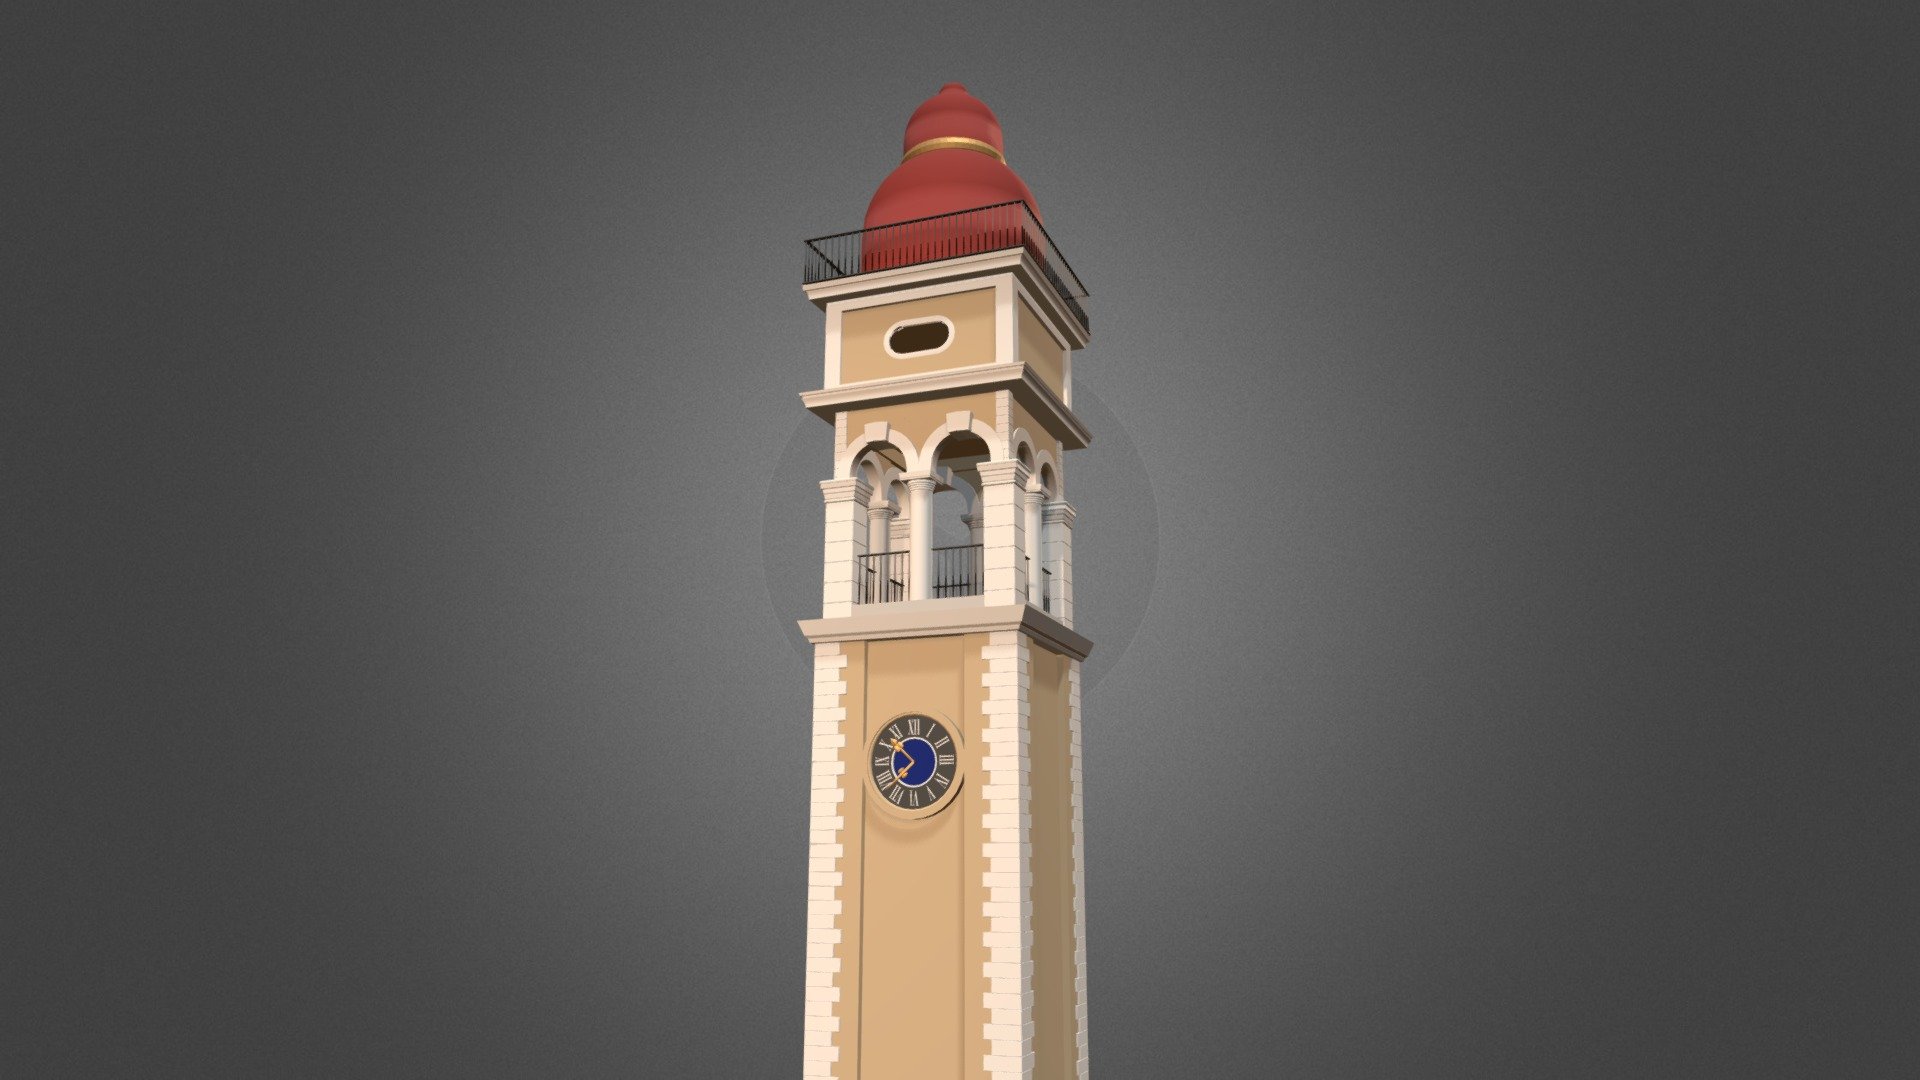 Saint Spyridon Church is a Greek Orthodox church located in Corfu, Greece. It was built in the 1580s. It houses the relics of Saint Spyridon and it is located in the old town of Corfu 3d model